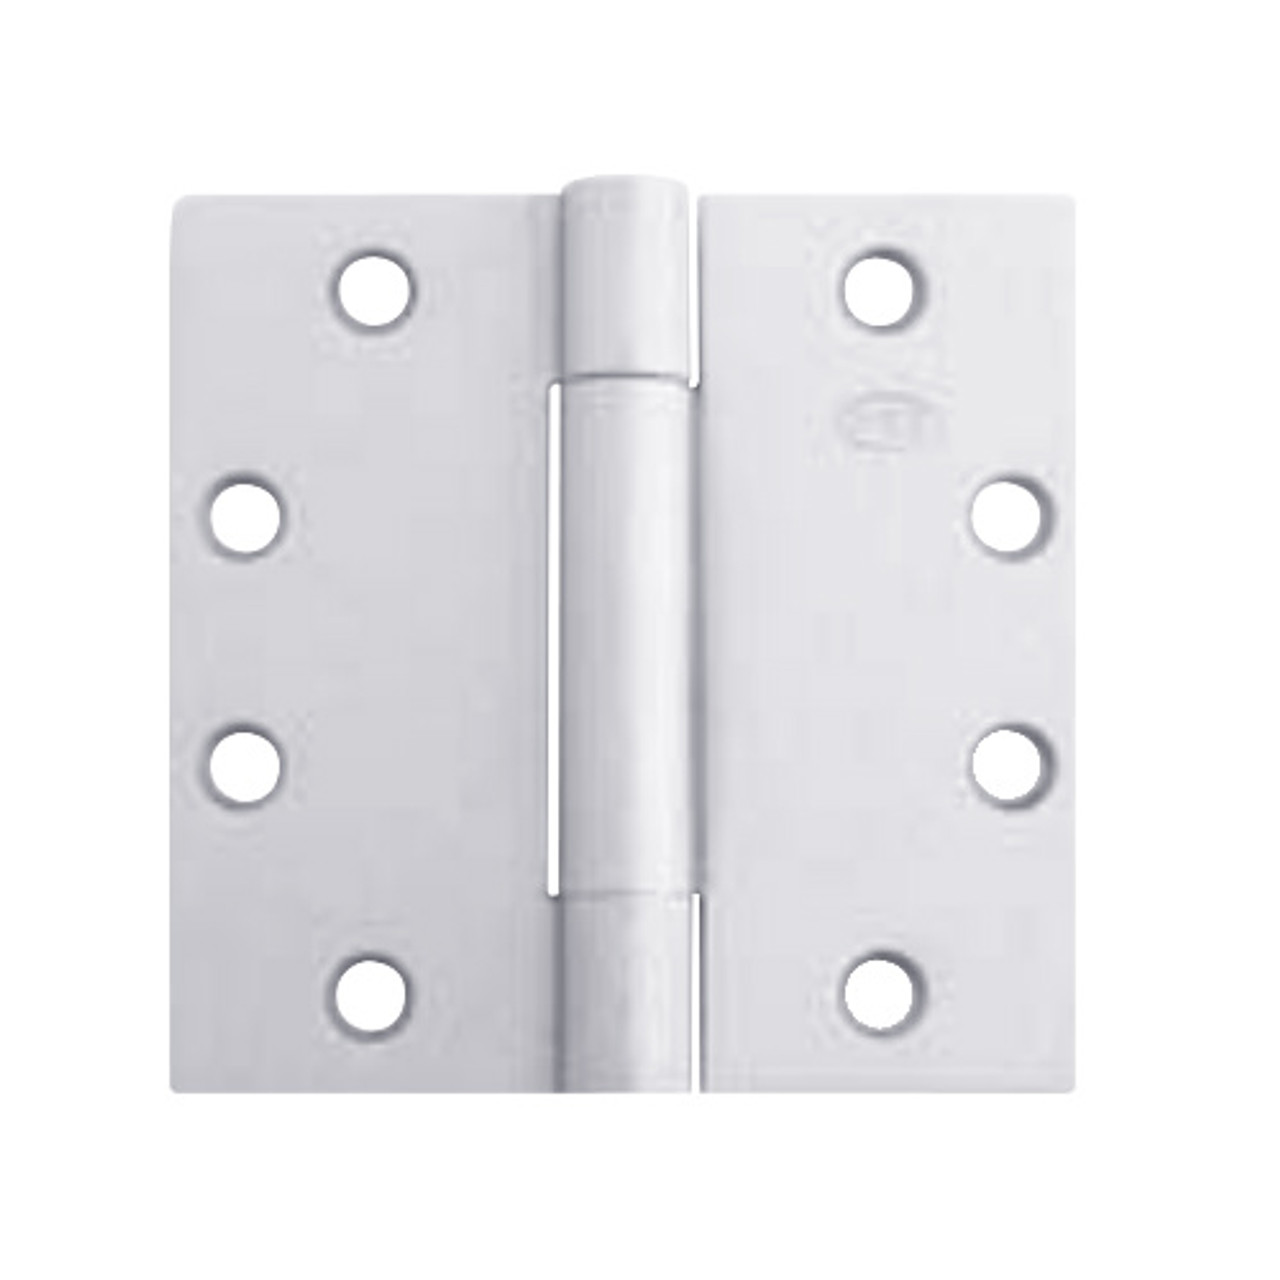 3CB1HW-4-5x4-651 IVES 3 Knuckle Concealed Bearing Full Mortise Hinge in Bright Chrome Plated